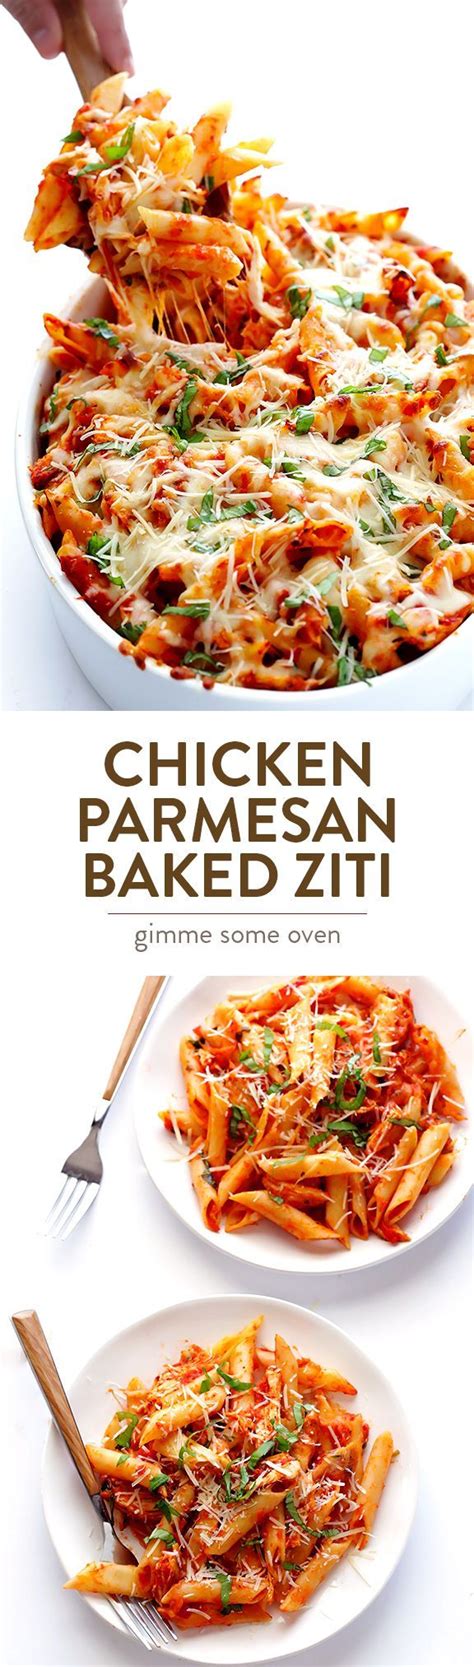 Chicken Parmesan Baked Ziti Gimme Some Oven Recipe Recipes Pasta